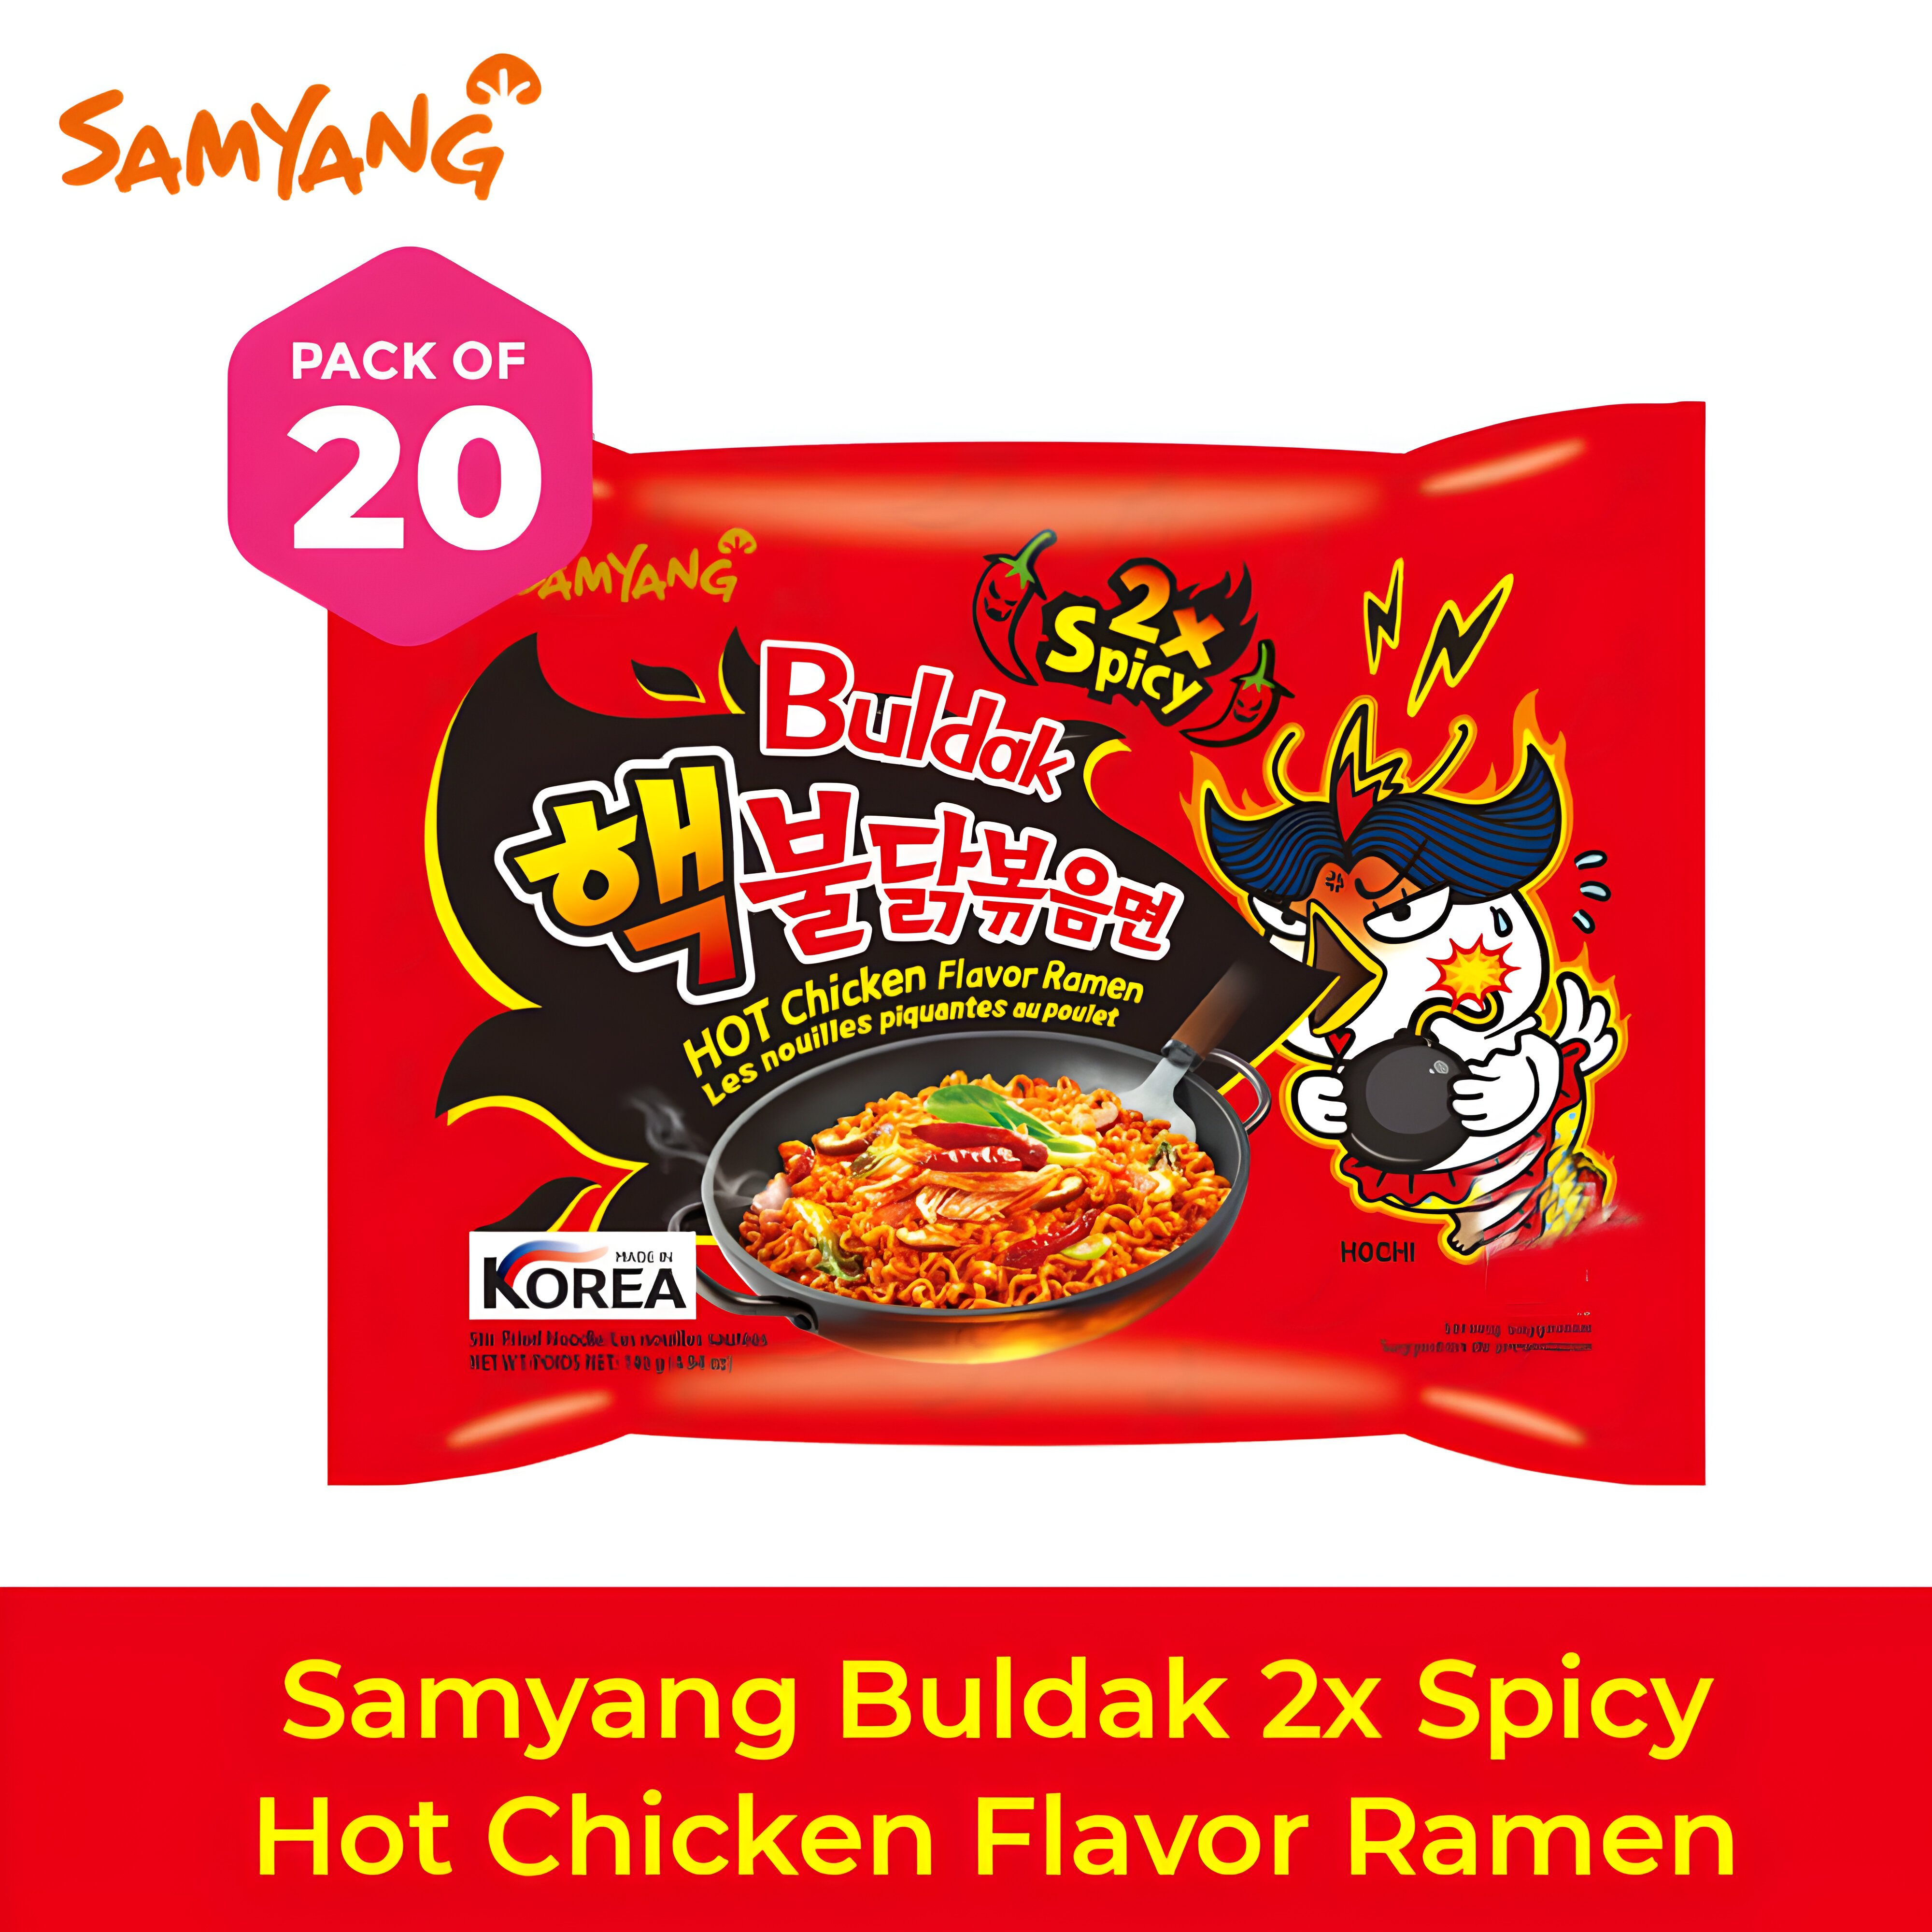 1694254522_1663405238_Fire-Chicken-2X-Spicy-NoodlePack-of-20-1 (2)